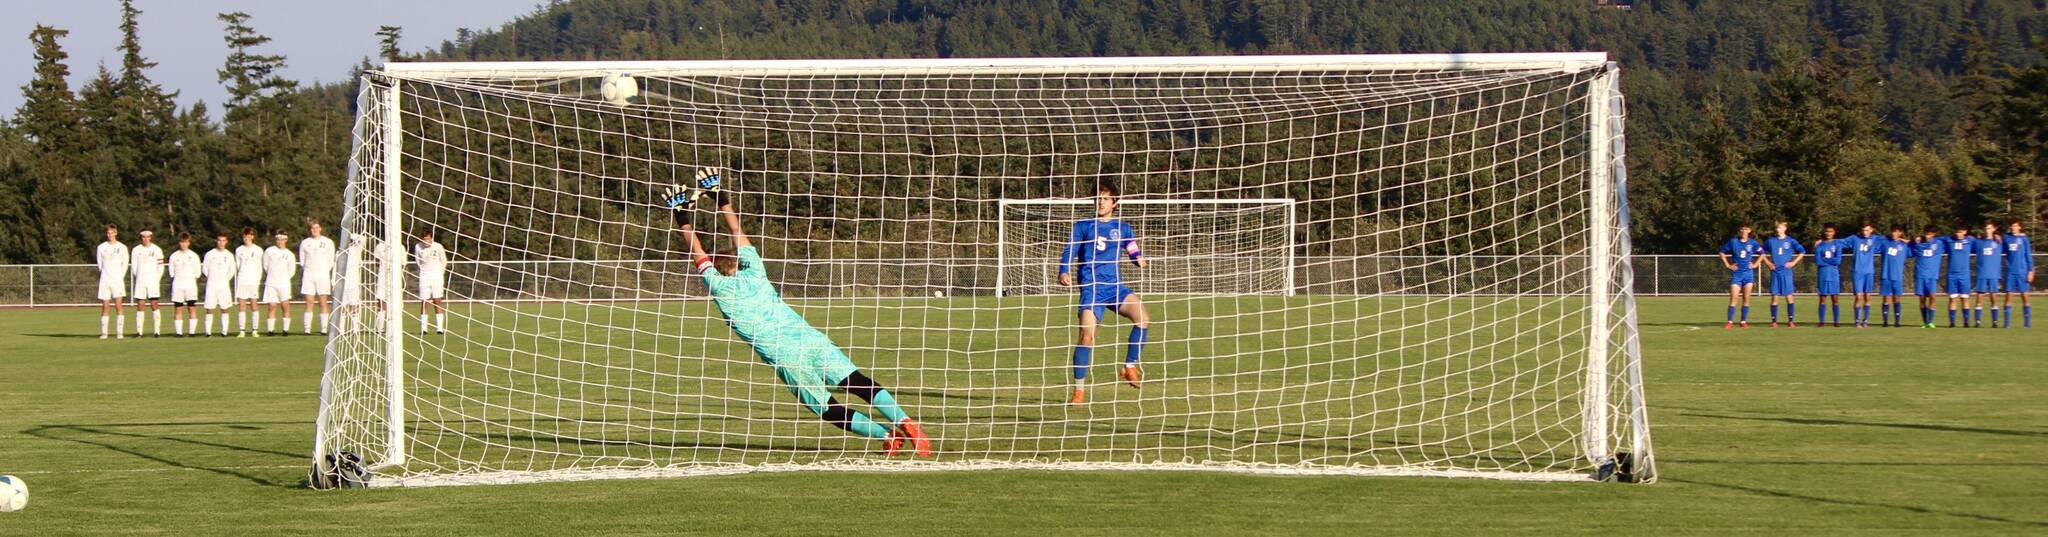 Corey Wiscomb photo
Diego Lago kicks the final PK point to seal the win for OHS against the Hurricanes.